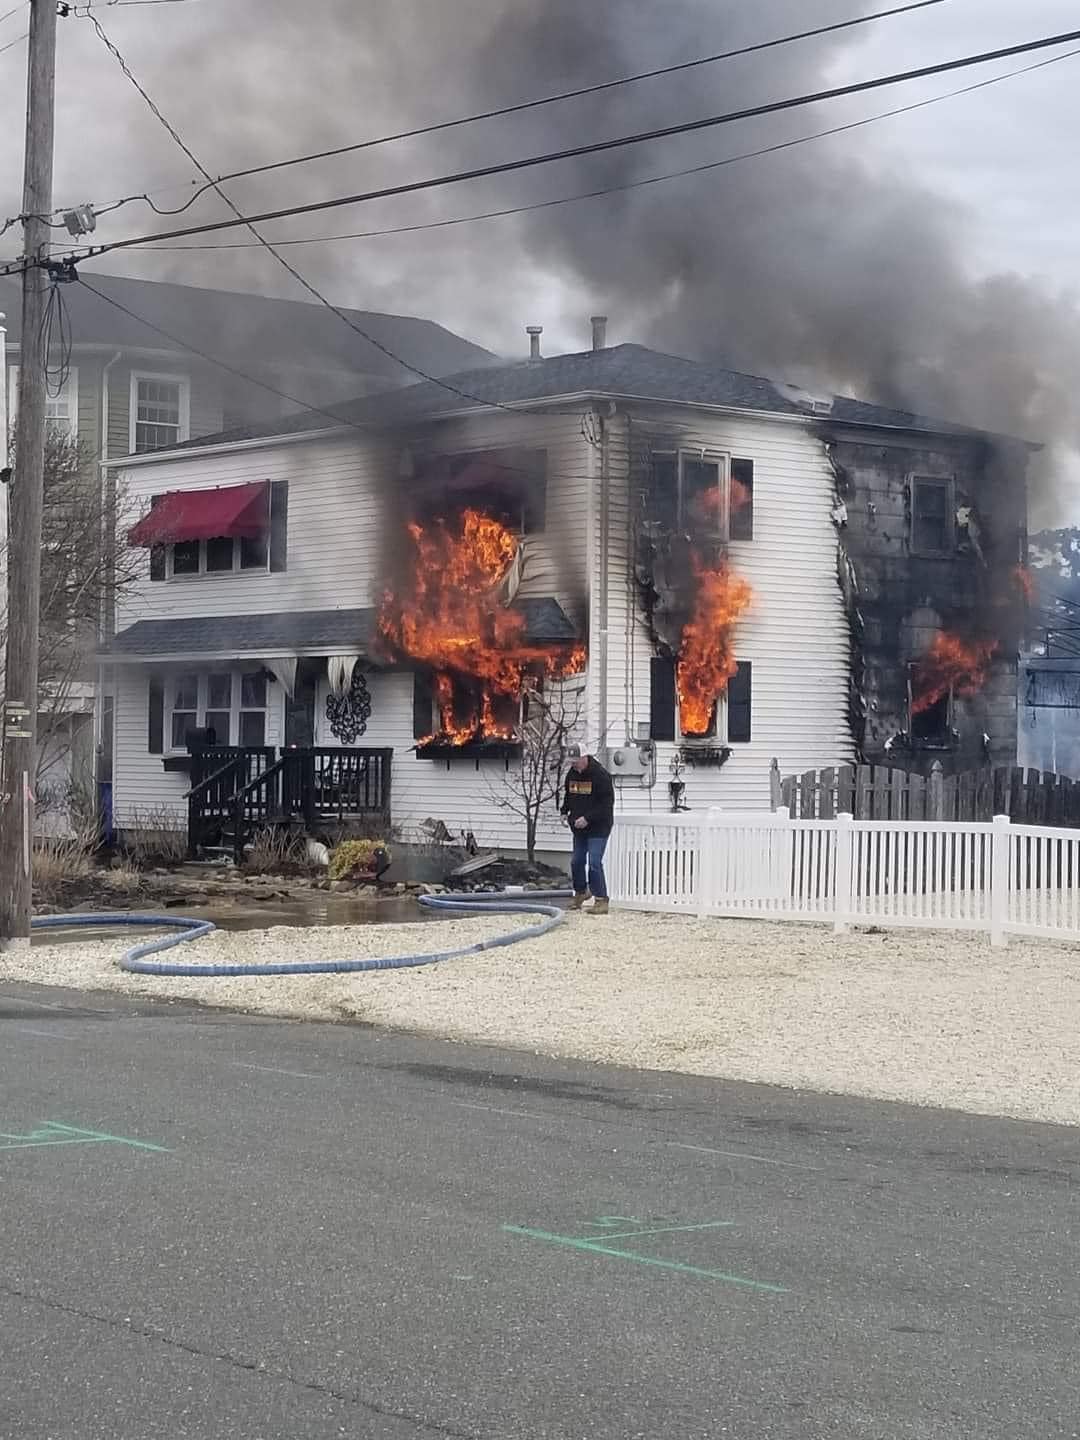 Beach Haven Home Destroyed In Fire - Jersey Shore Online